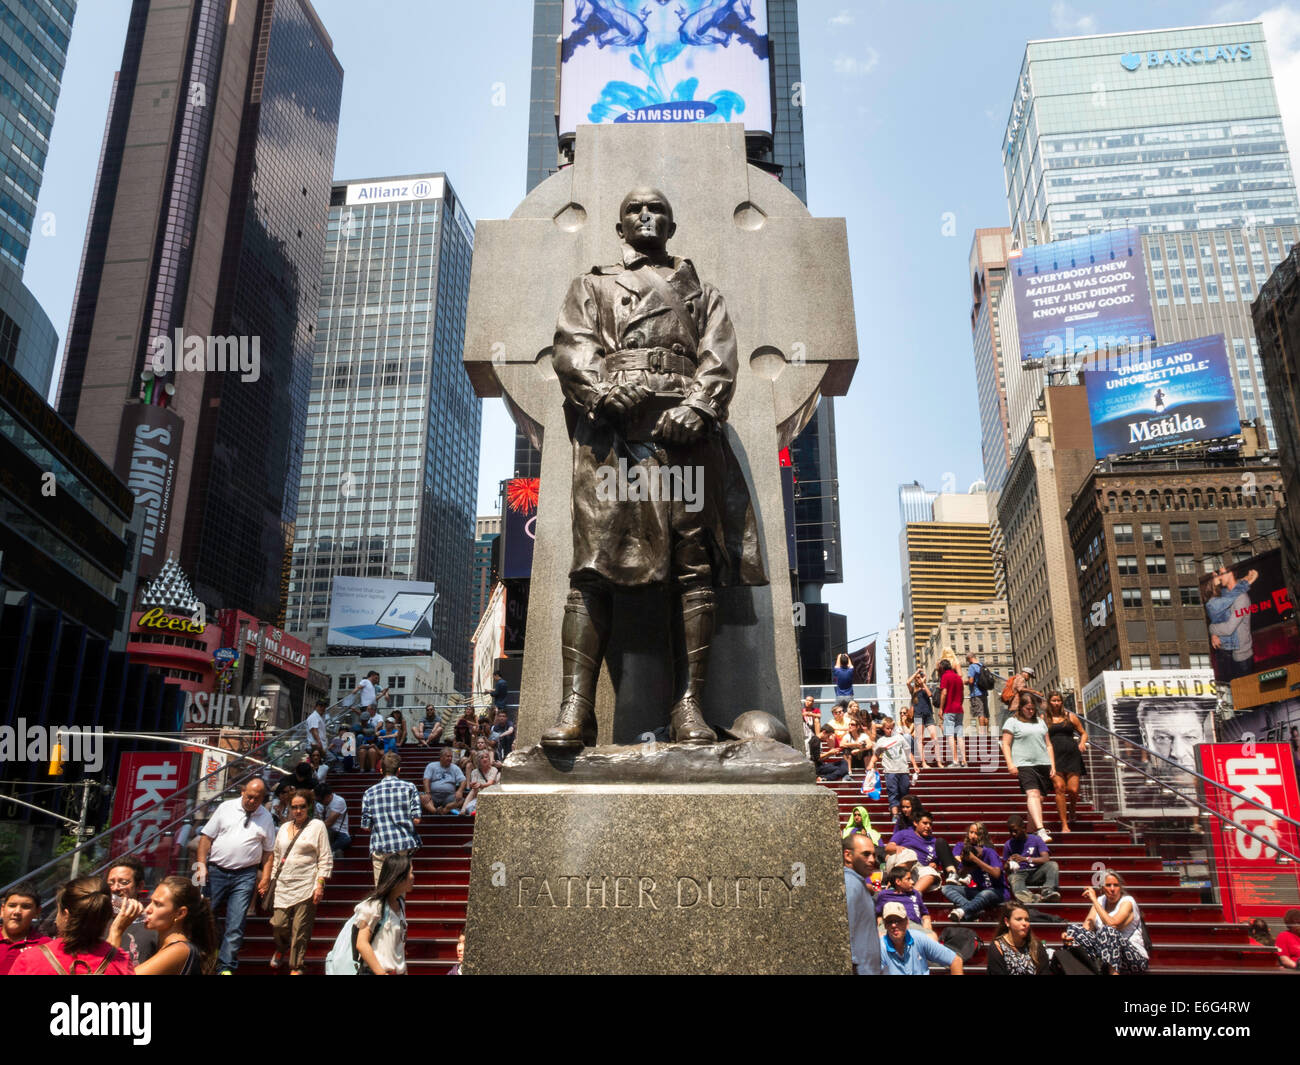 Father Duffy Statue in Times Square, NYC Stock Photo - Alamy